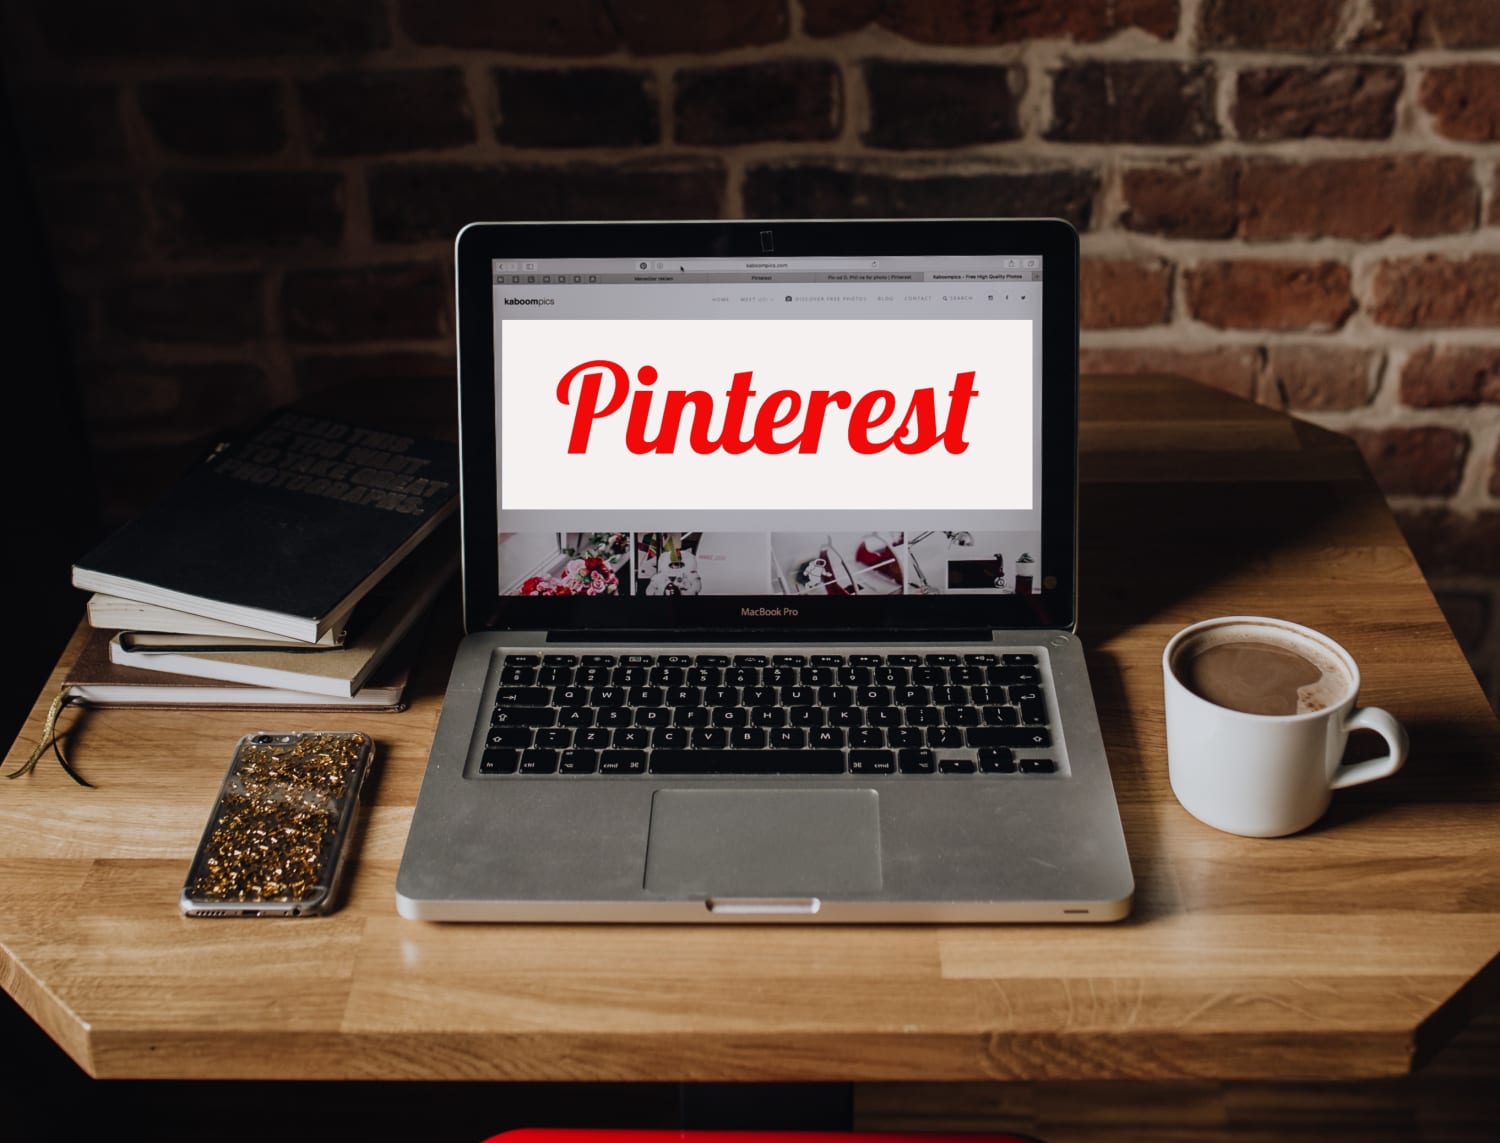 7 Important Things to Help Increase Website Traffic from Pinterest